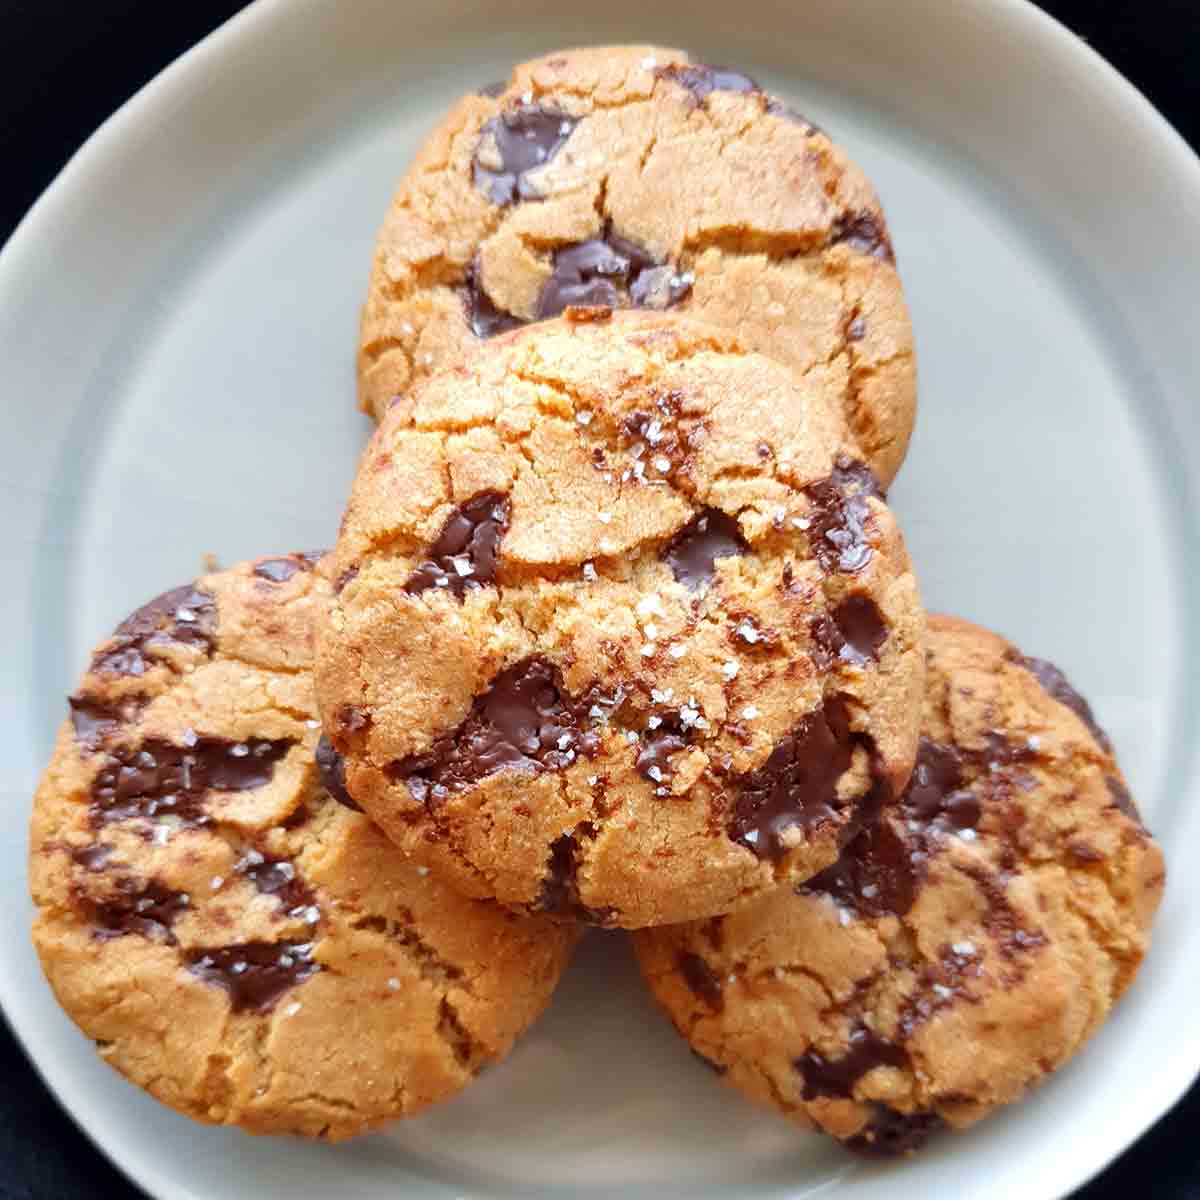 Four salted brown butter chocolate chunk cookies on a white plate.